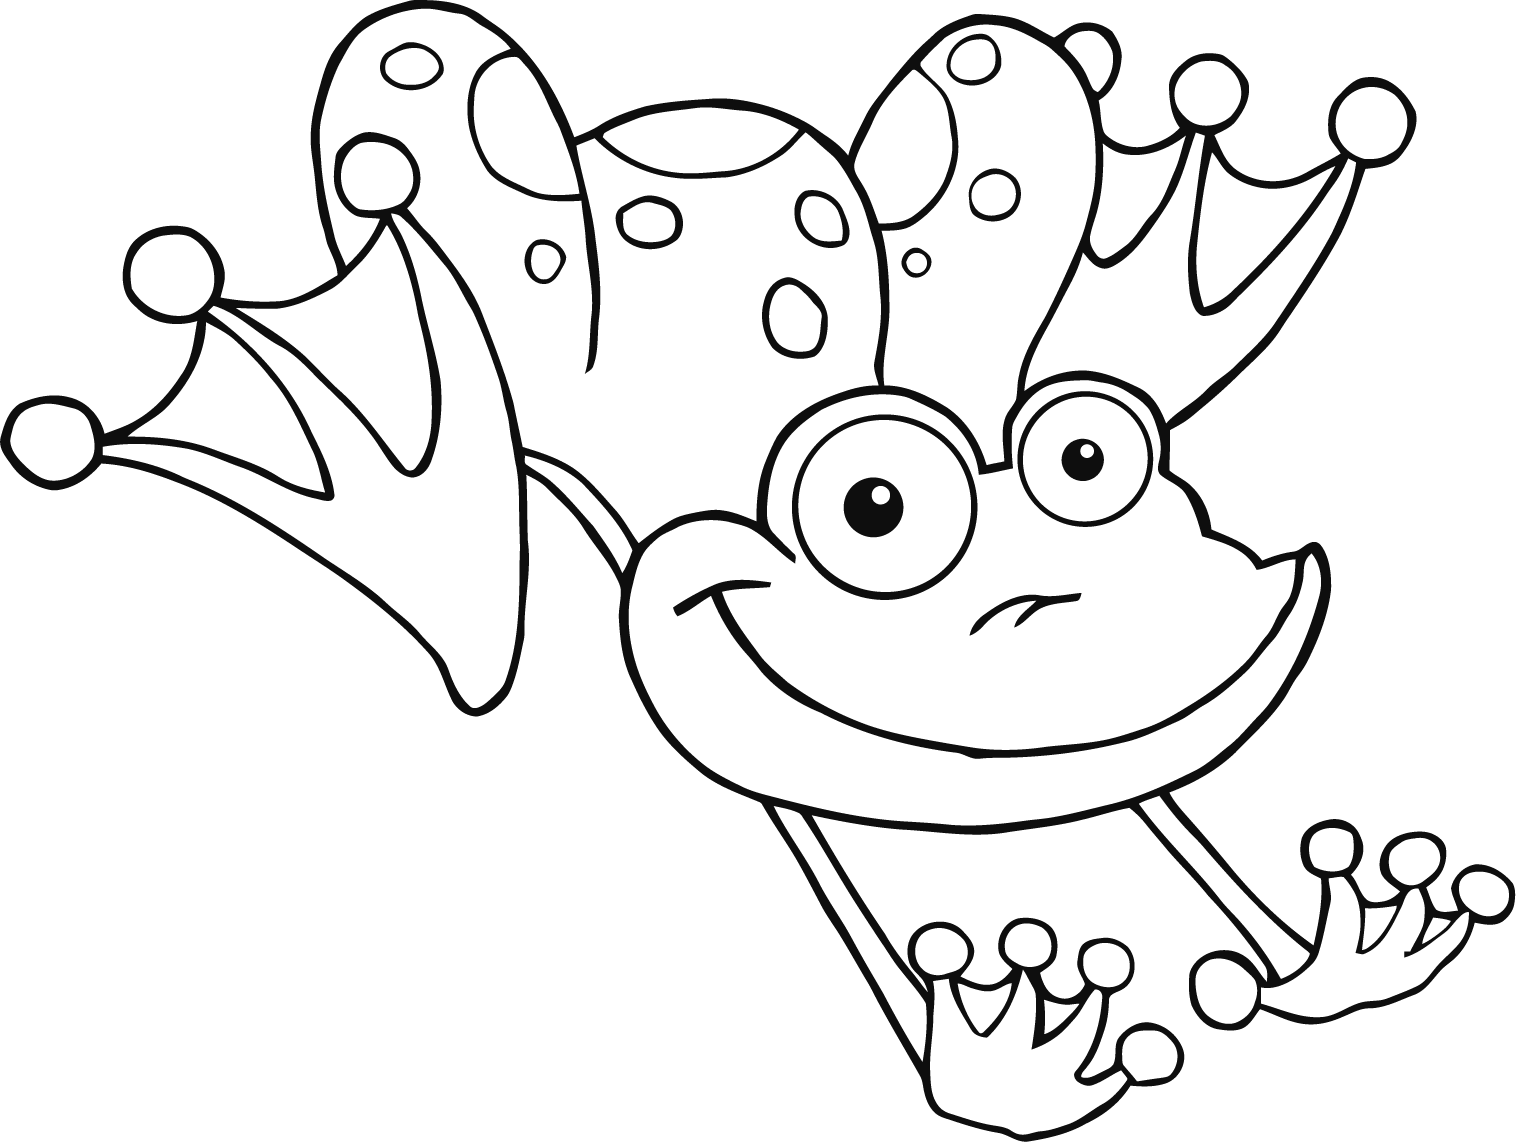 Coloring Pages of Frogs For Kids